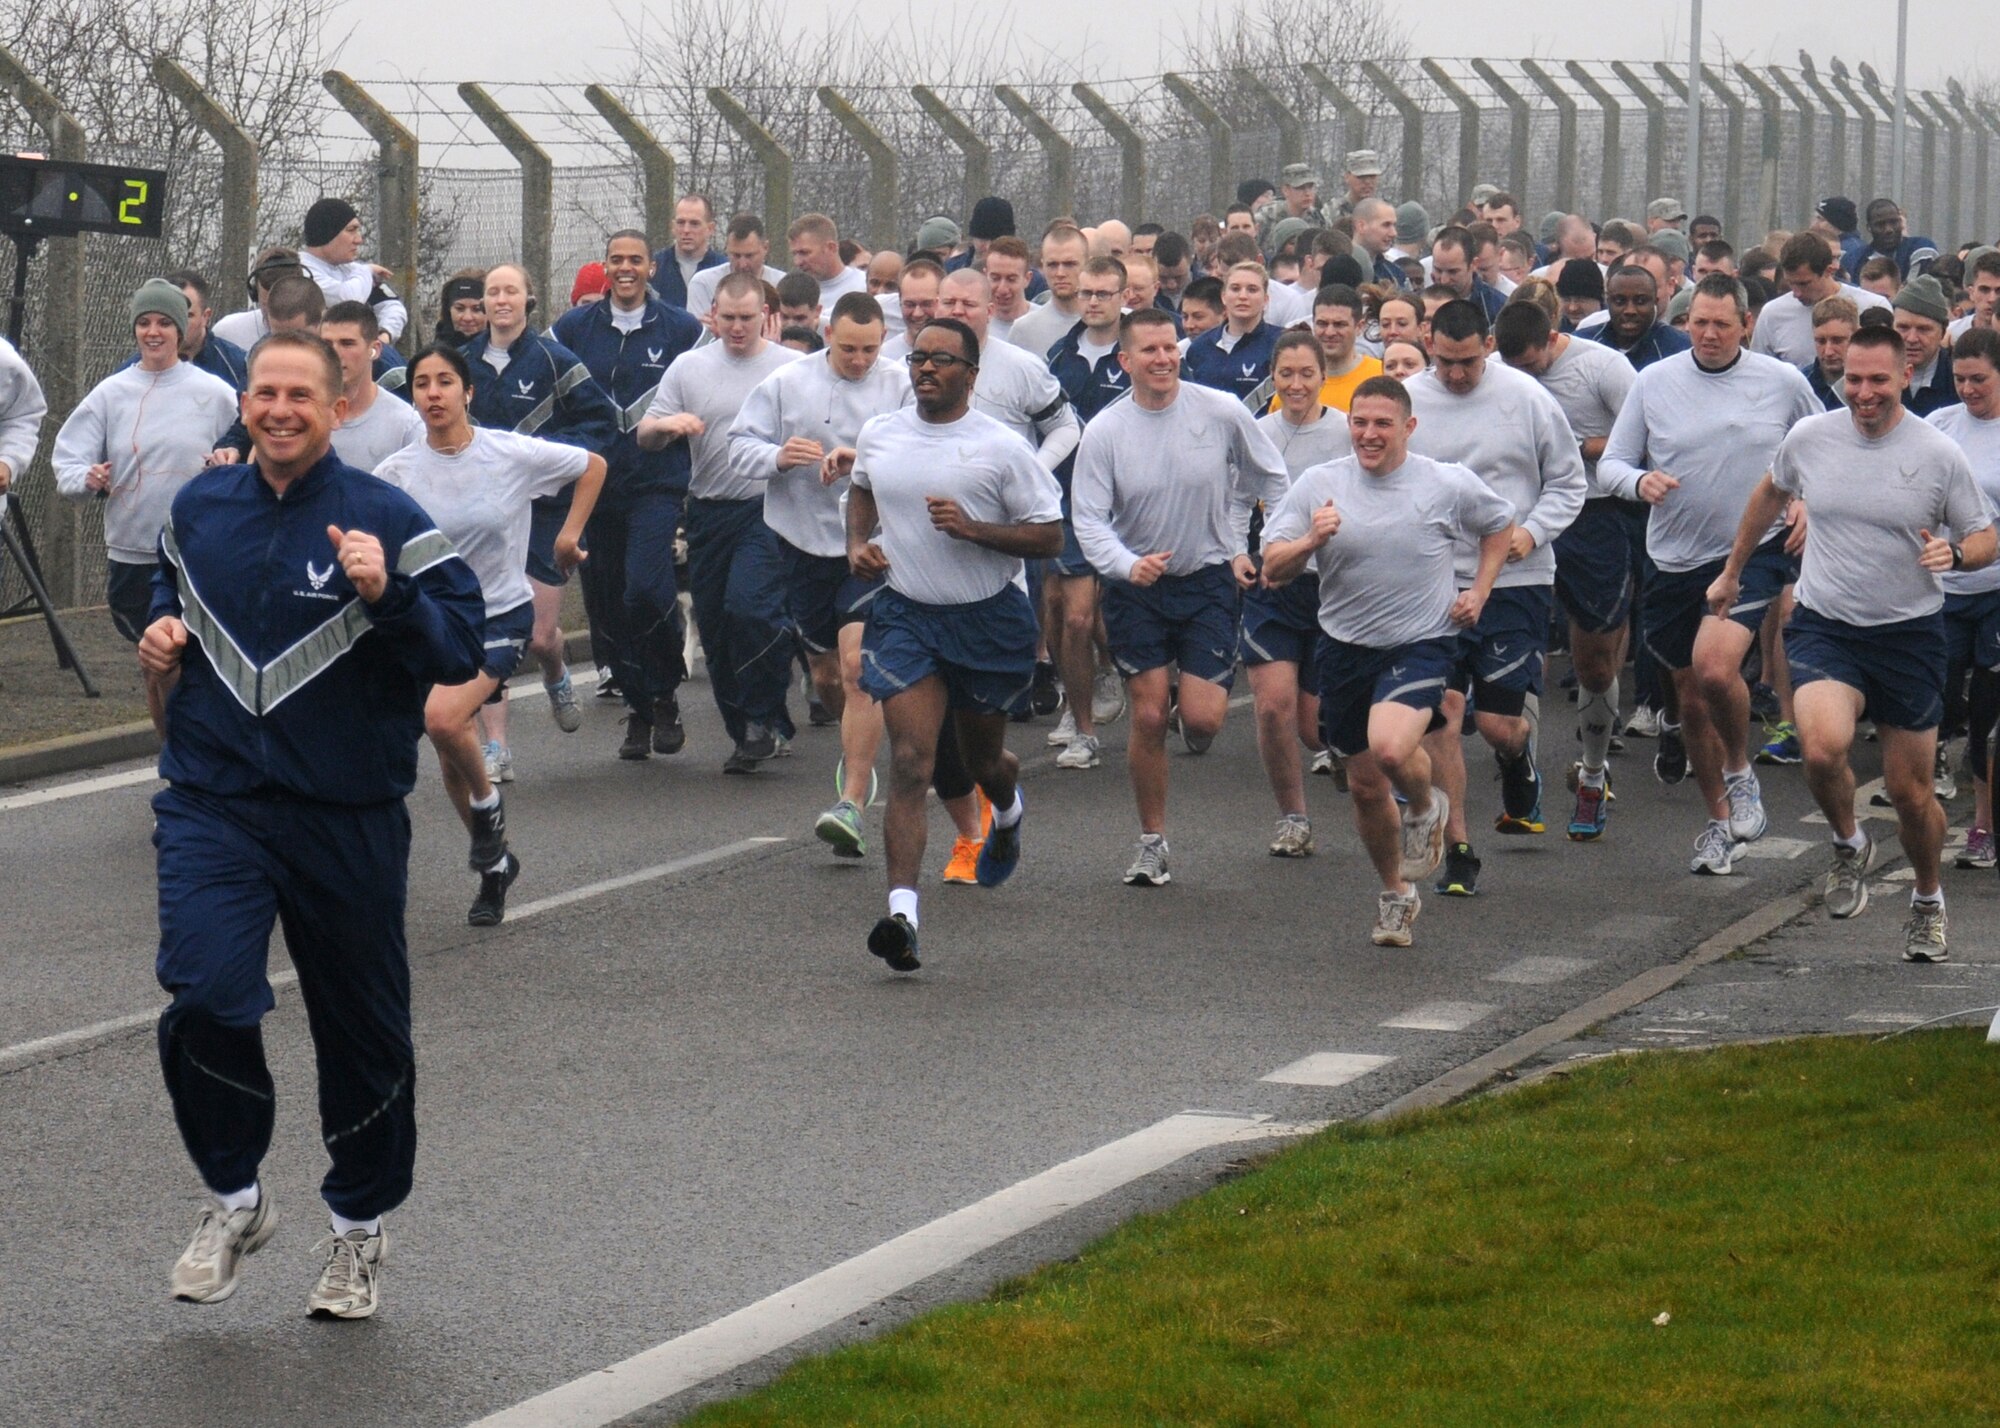 Col. Kyle Voigt, 100th Air Refueling Wing vice commander, leads his Airmen in improving their fitness during a wing run March 8, 2013, on Perimeter Road near the Hardstand Fitness Center on RAF Mildenhall, England. The run takes place on the first Friday of every month and is mandatory for all 100th Air Refueling Wing military personnel, but tenant units and base ID card holders 13-years and older are welcome to attend. (U.S. Air Force photo by Gina Randall/Released)